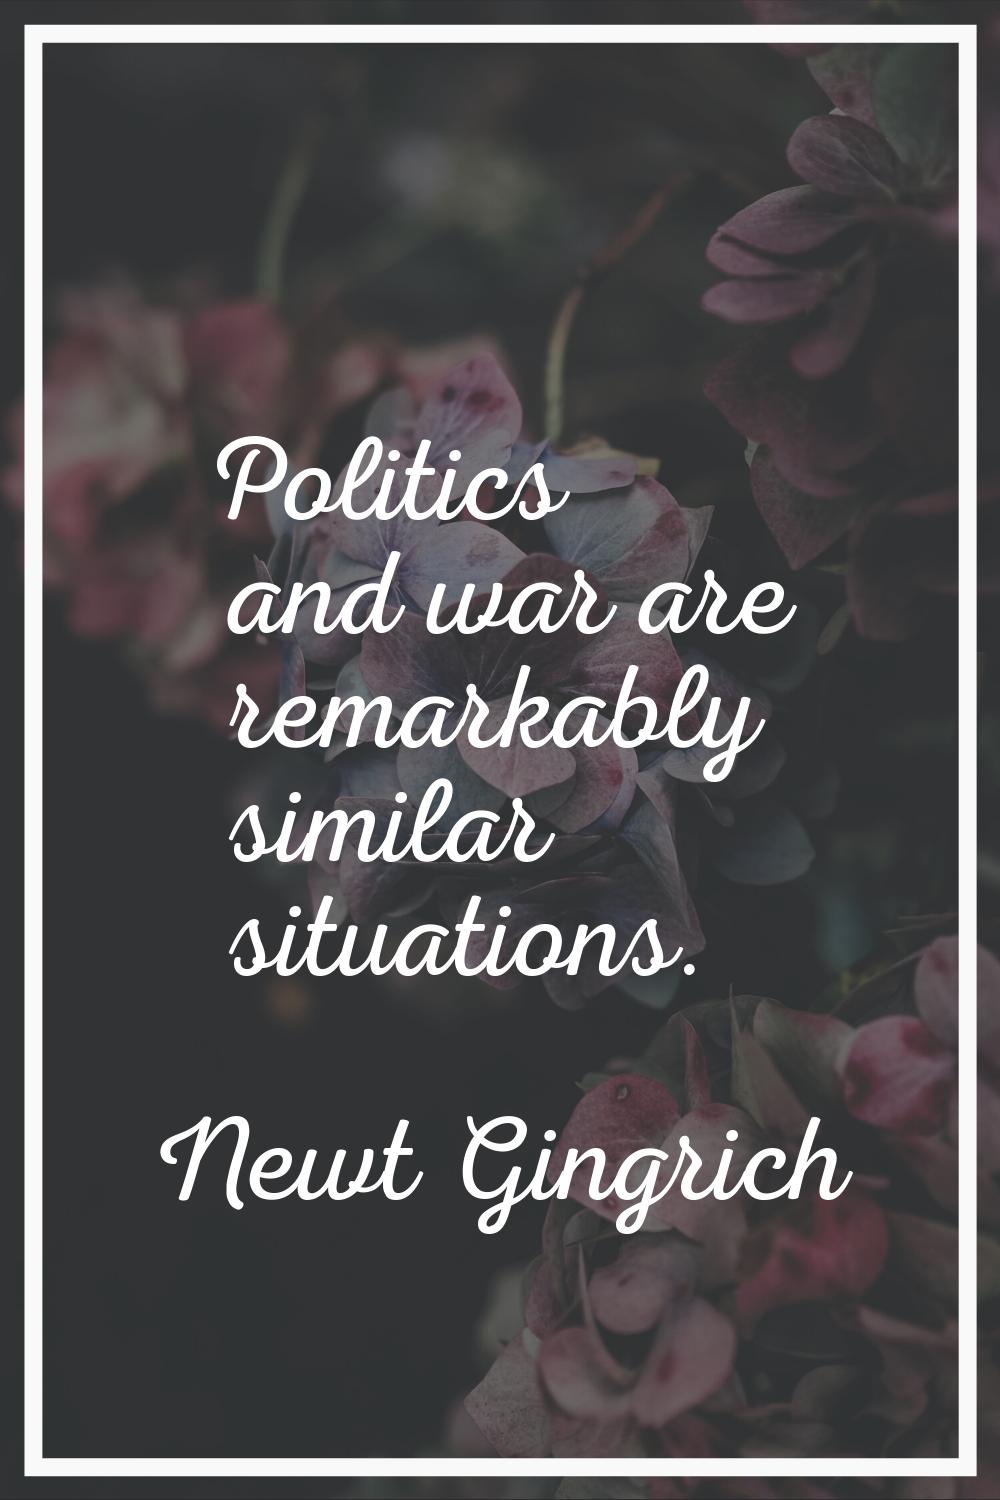 Politics and war are remarkably similar situations.